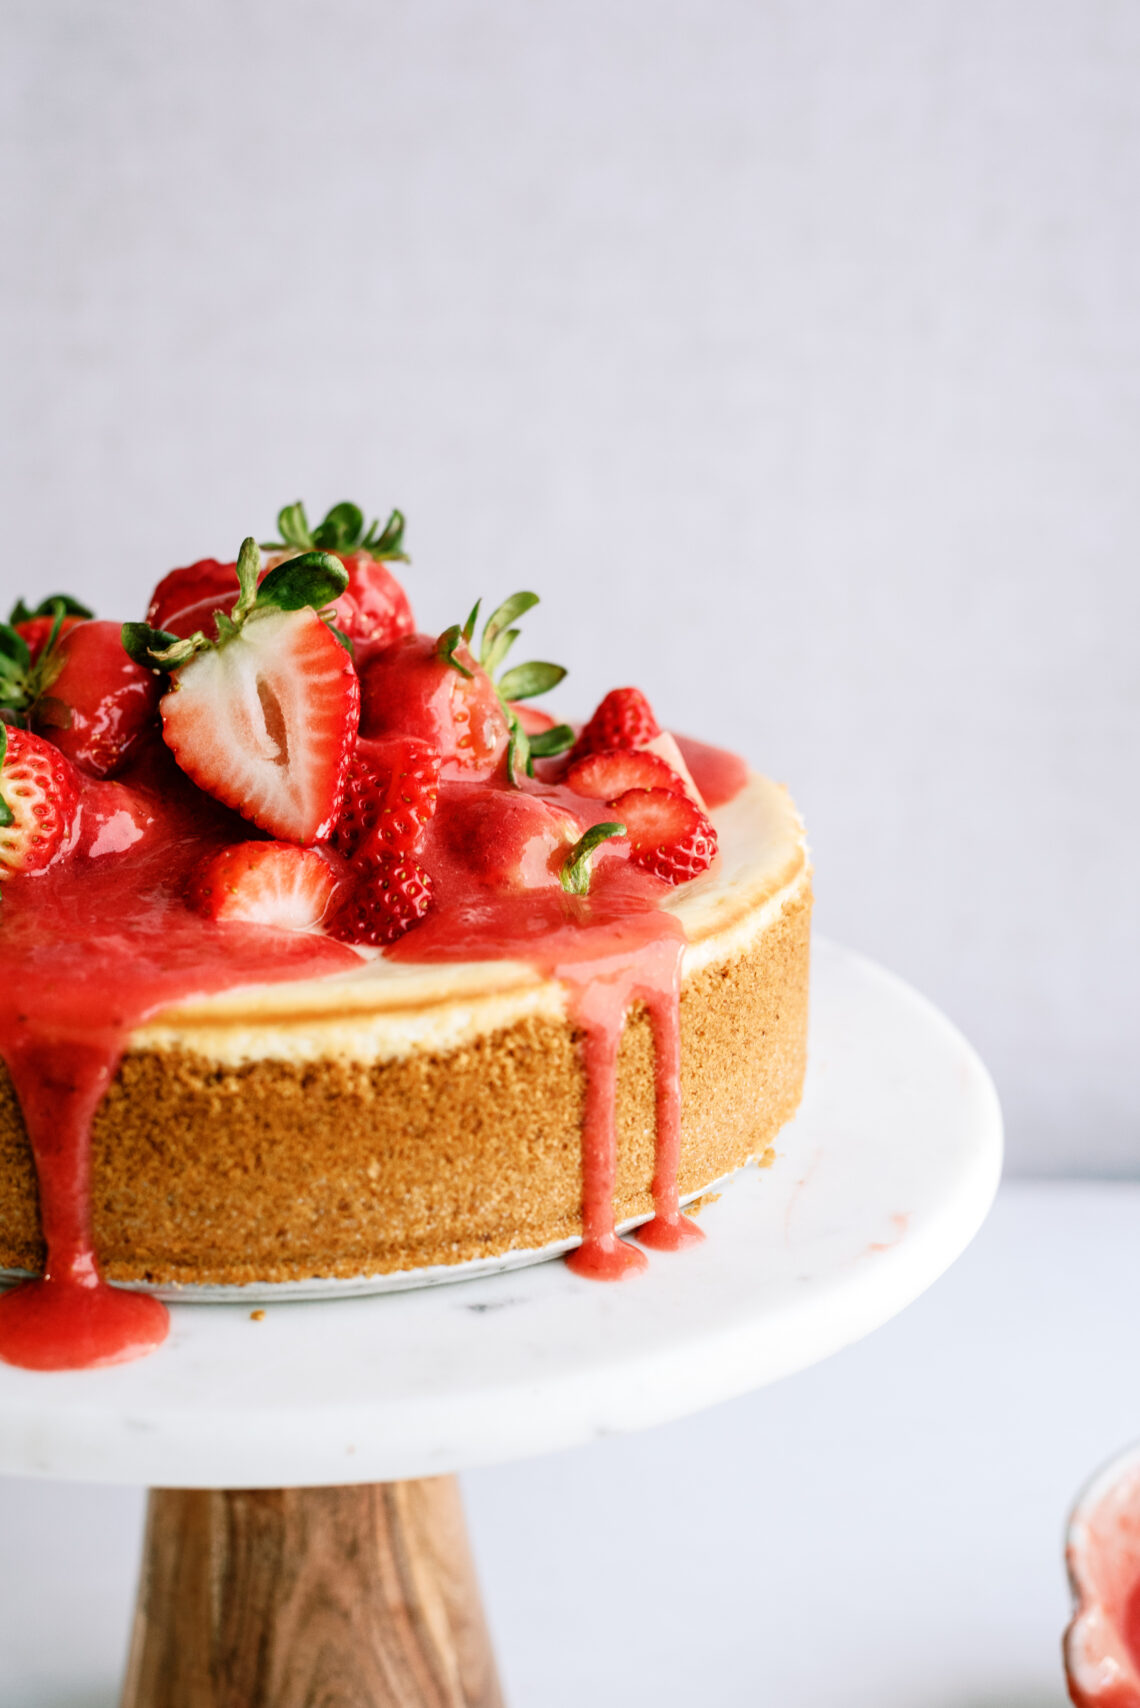 strawberry cheesecake on a cake stand